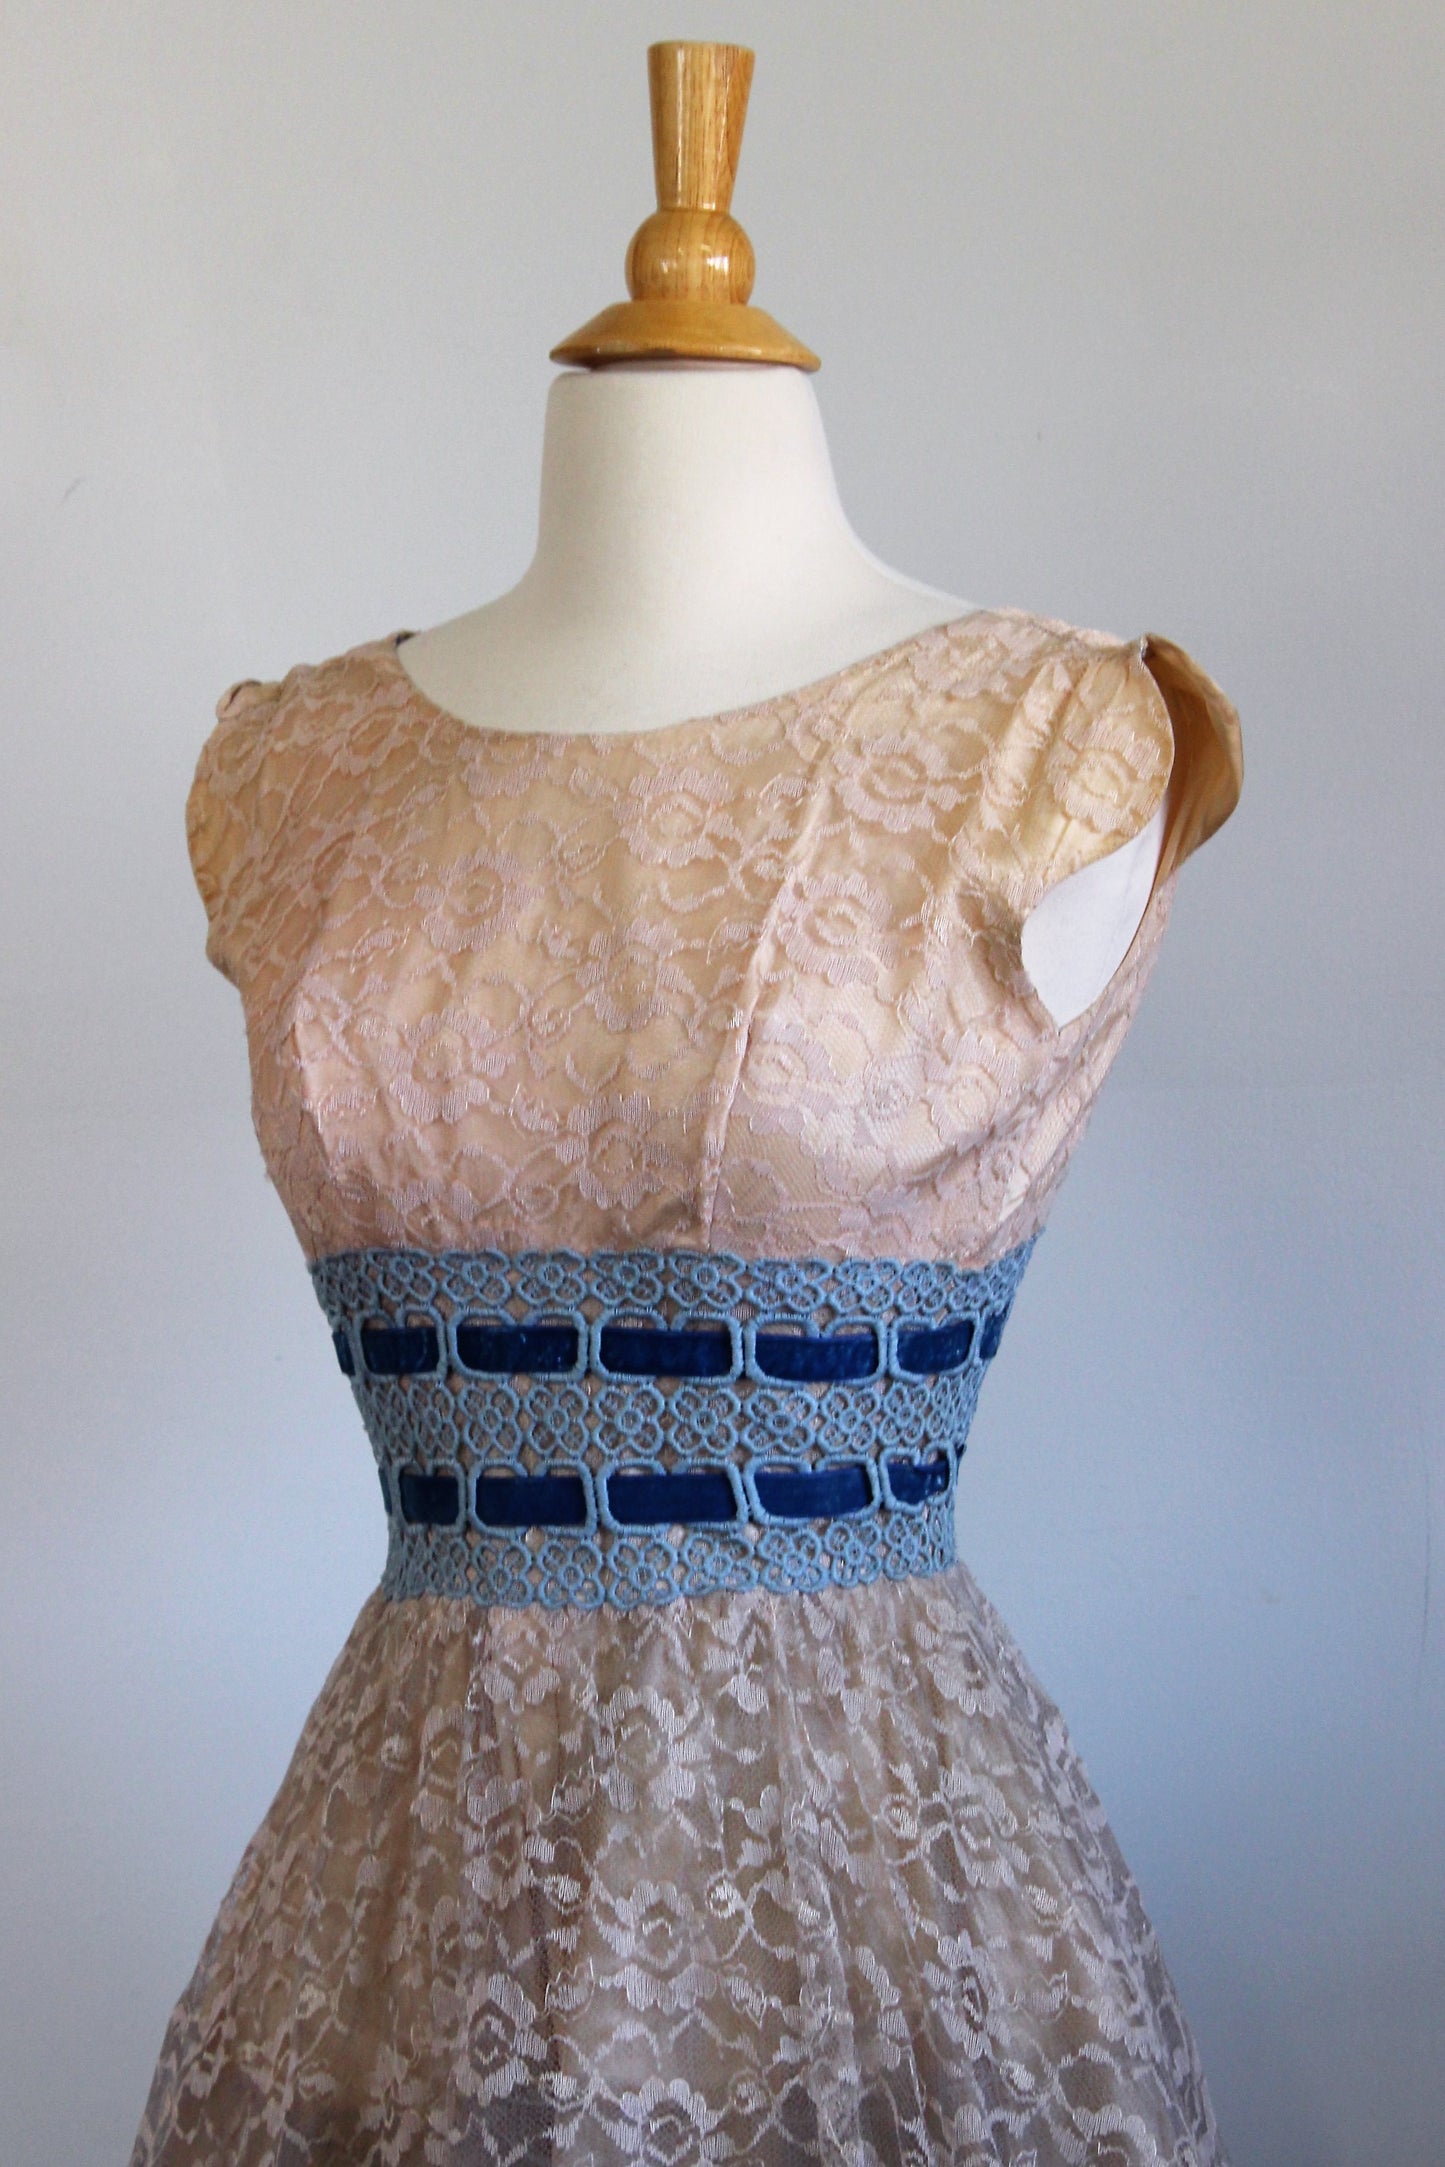 Vintage 1950s Lace Party Dress Fit And Flare